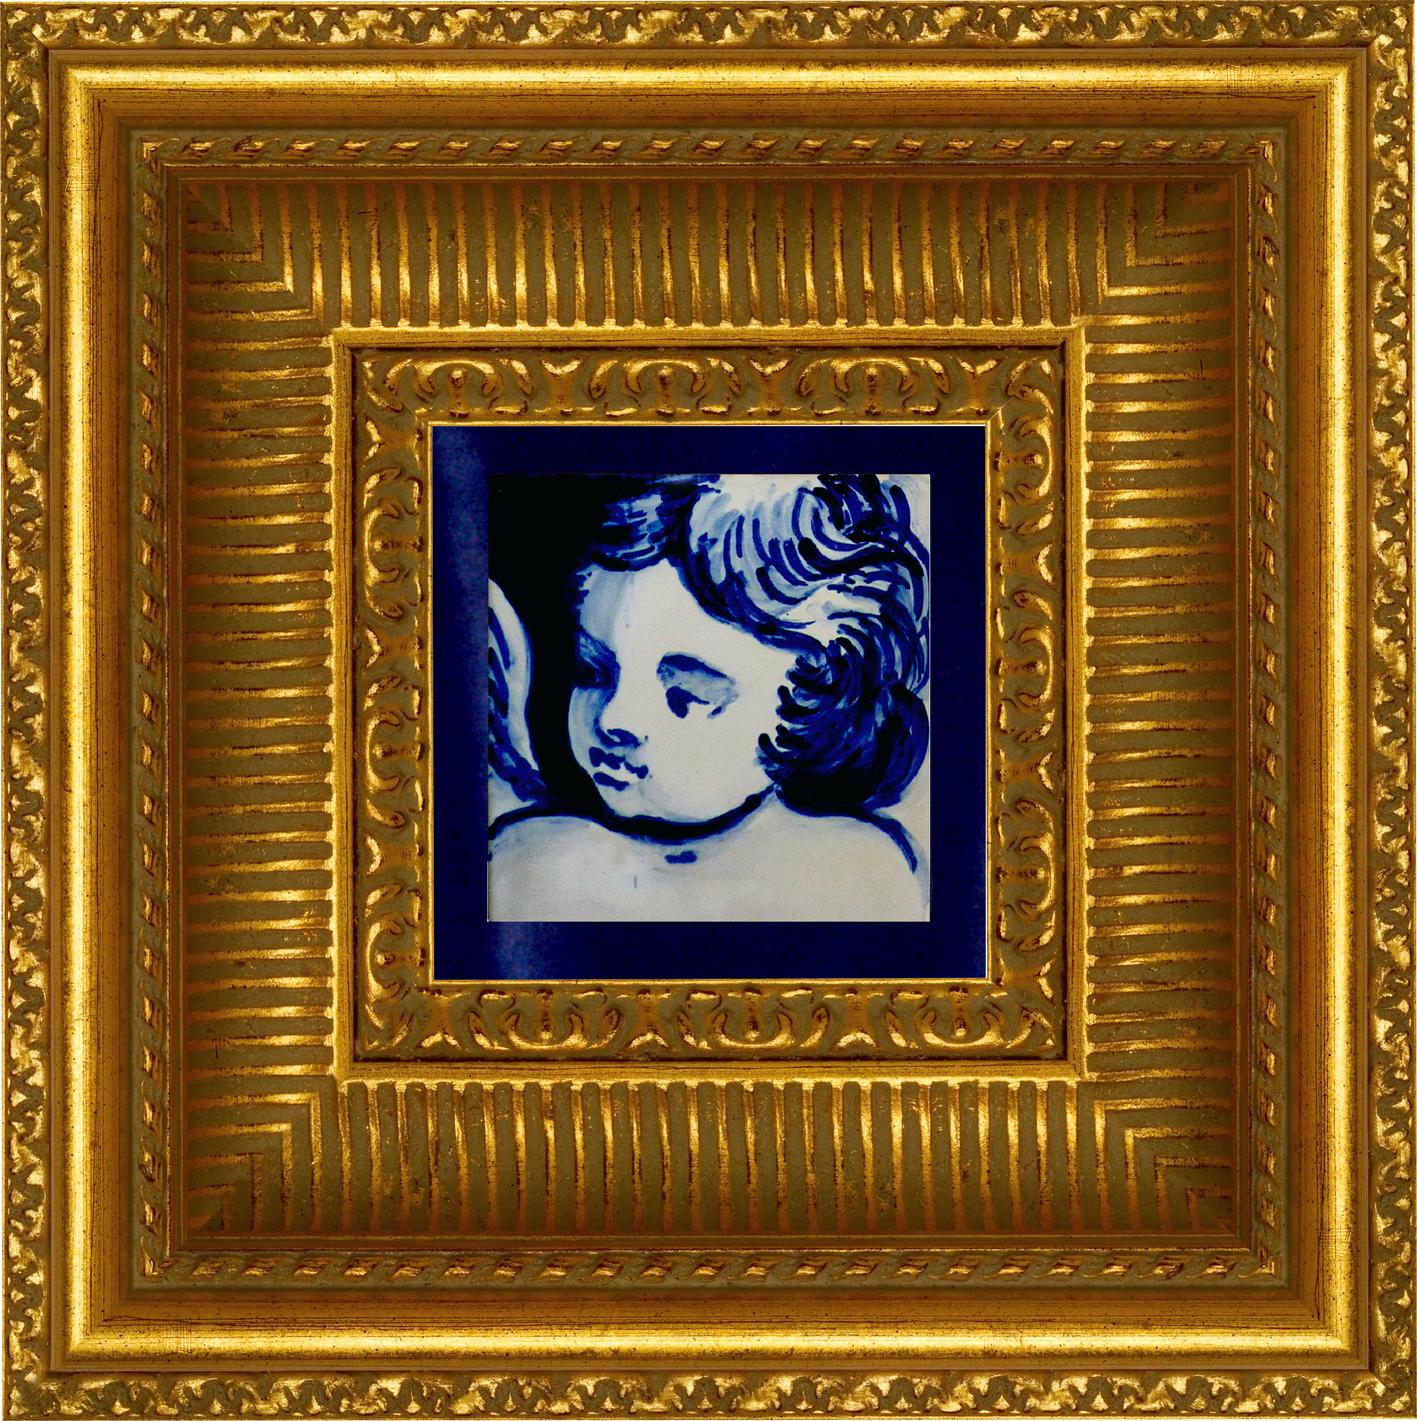 Gorgeous blue hand painted Baroque cherub or angel 18th century style Portuguese ceramic tile/azulejo.
The tile painted in cobalt blue over white in typical 18th century Portugal set the taste for monumental ceramic tile applications in churches